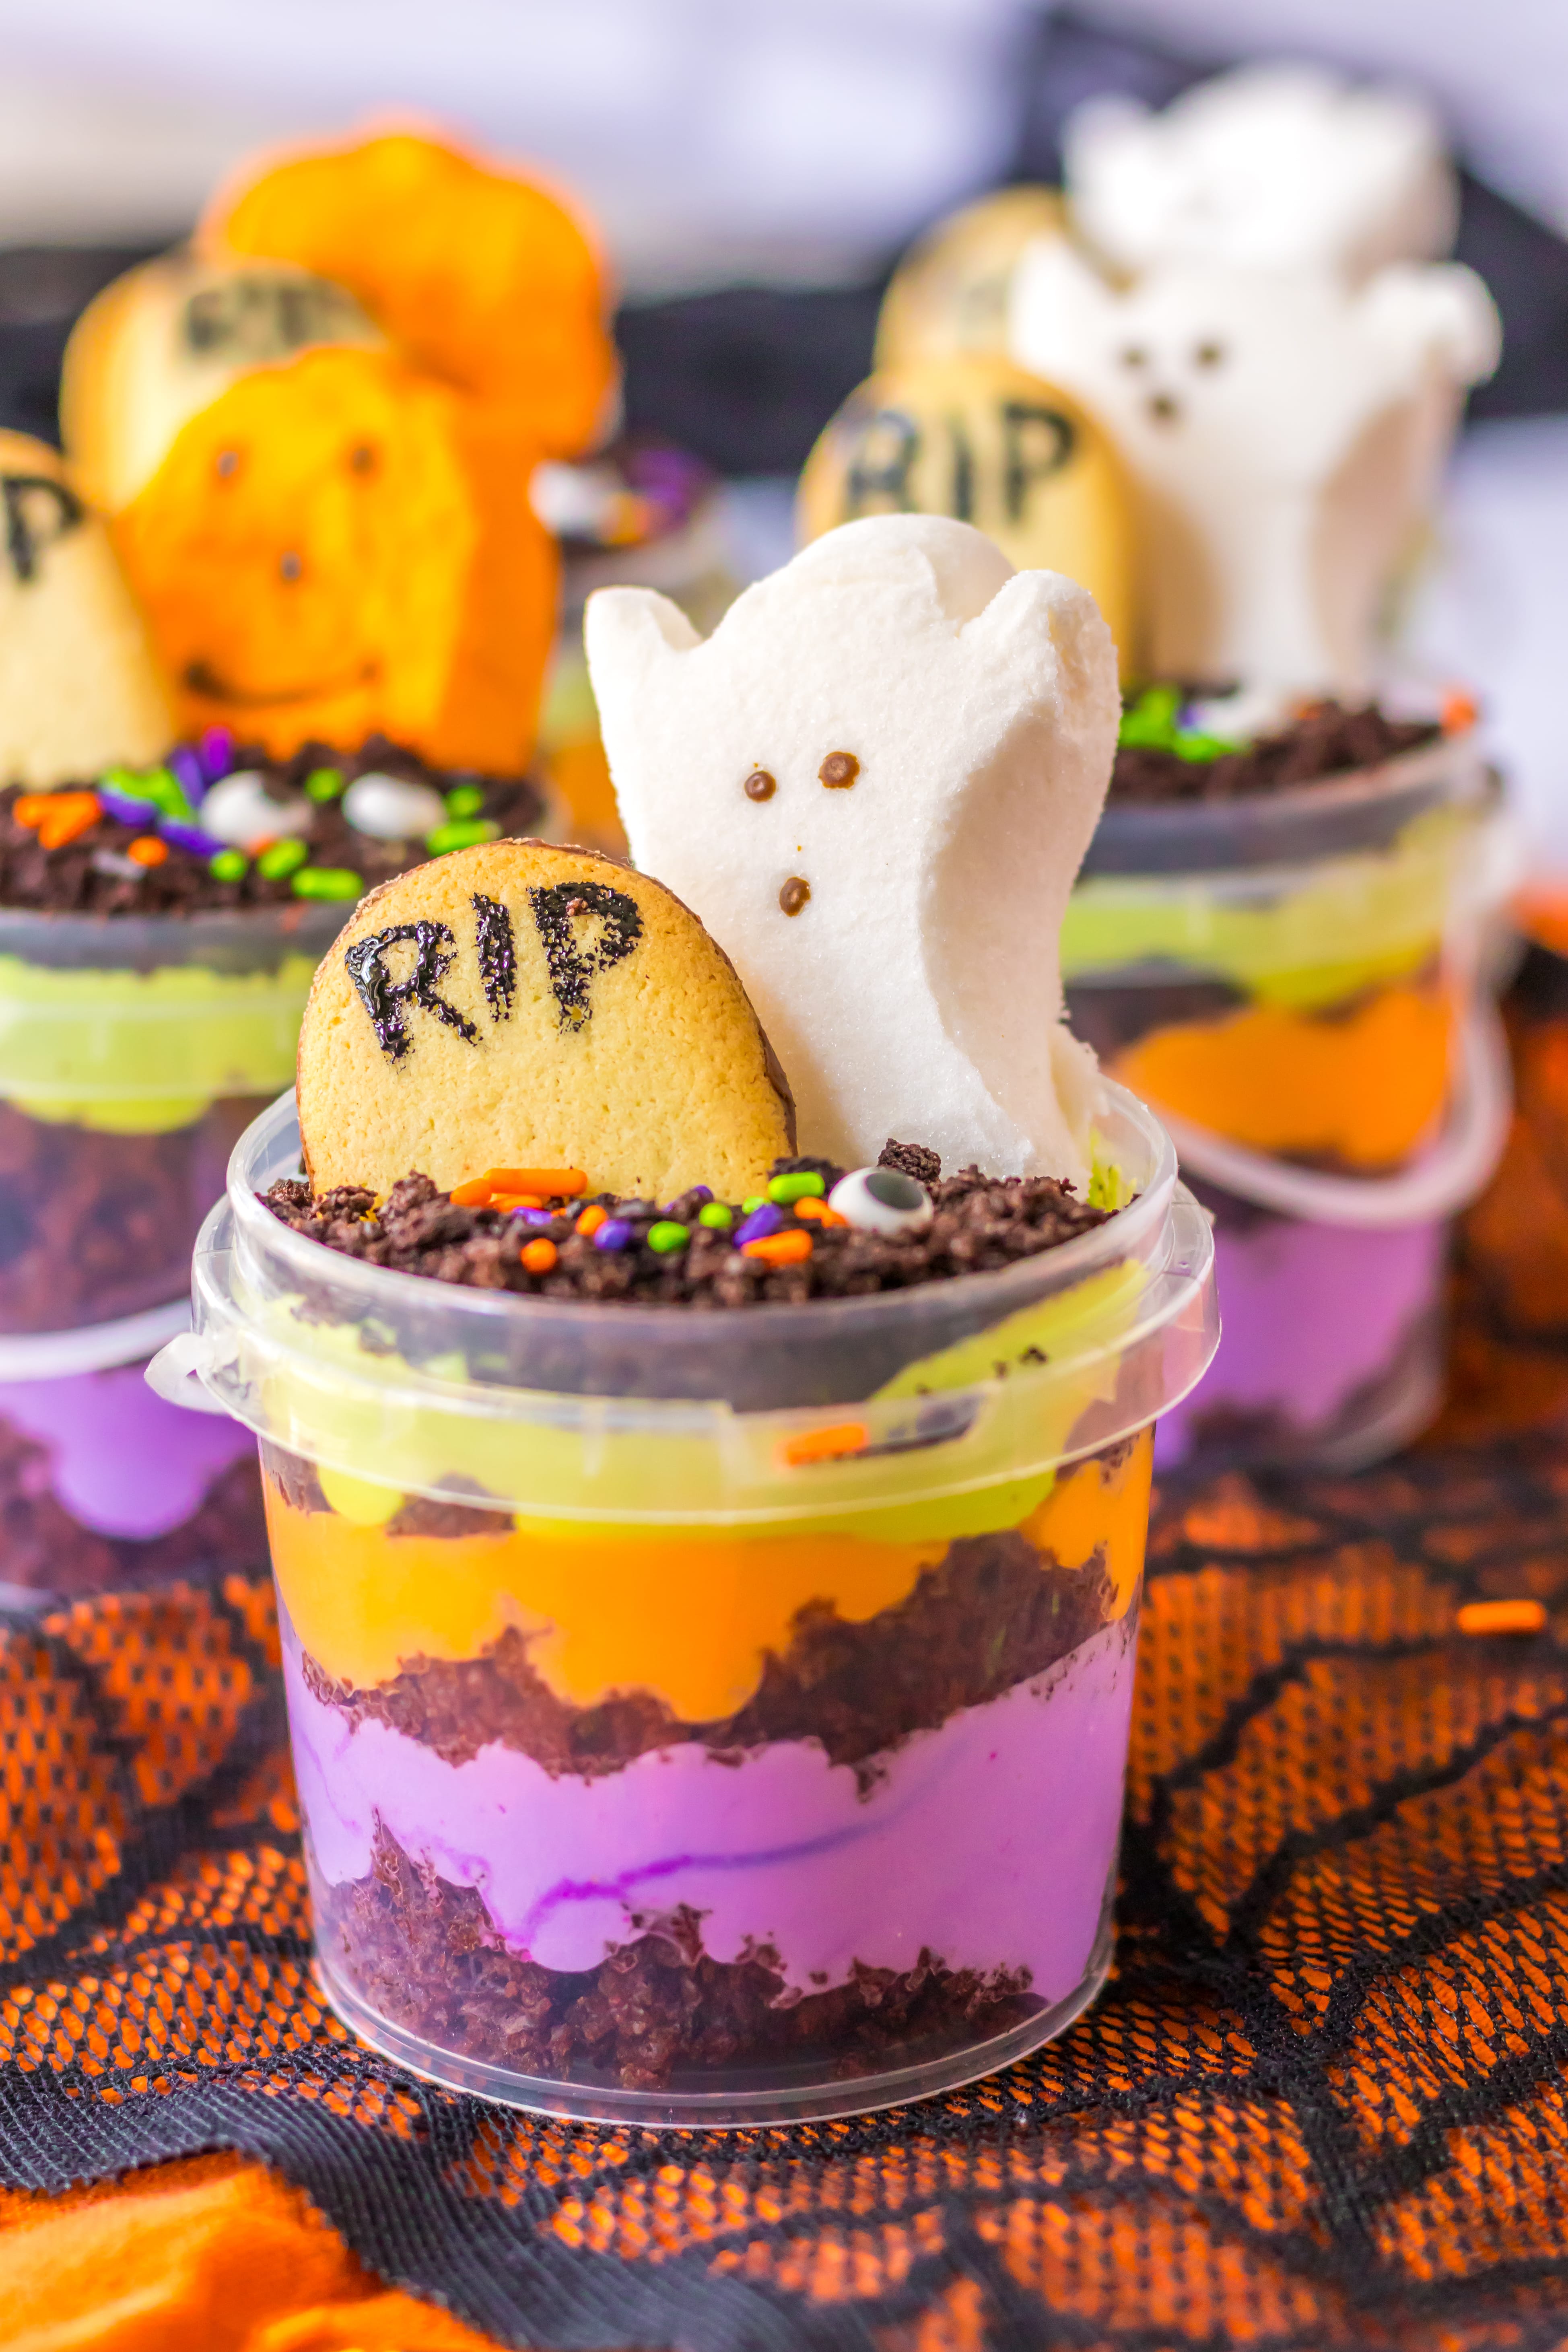 Graveyard Pudding Cups